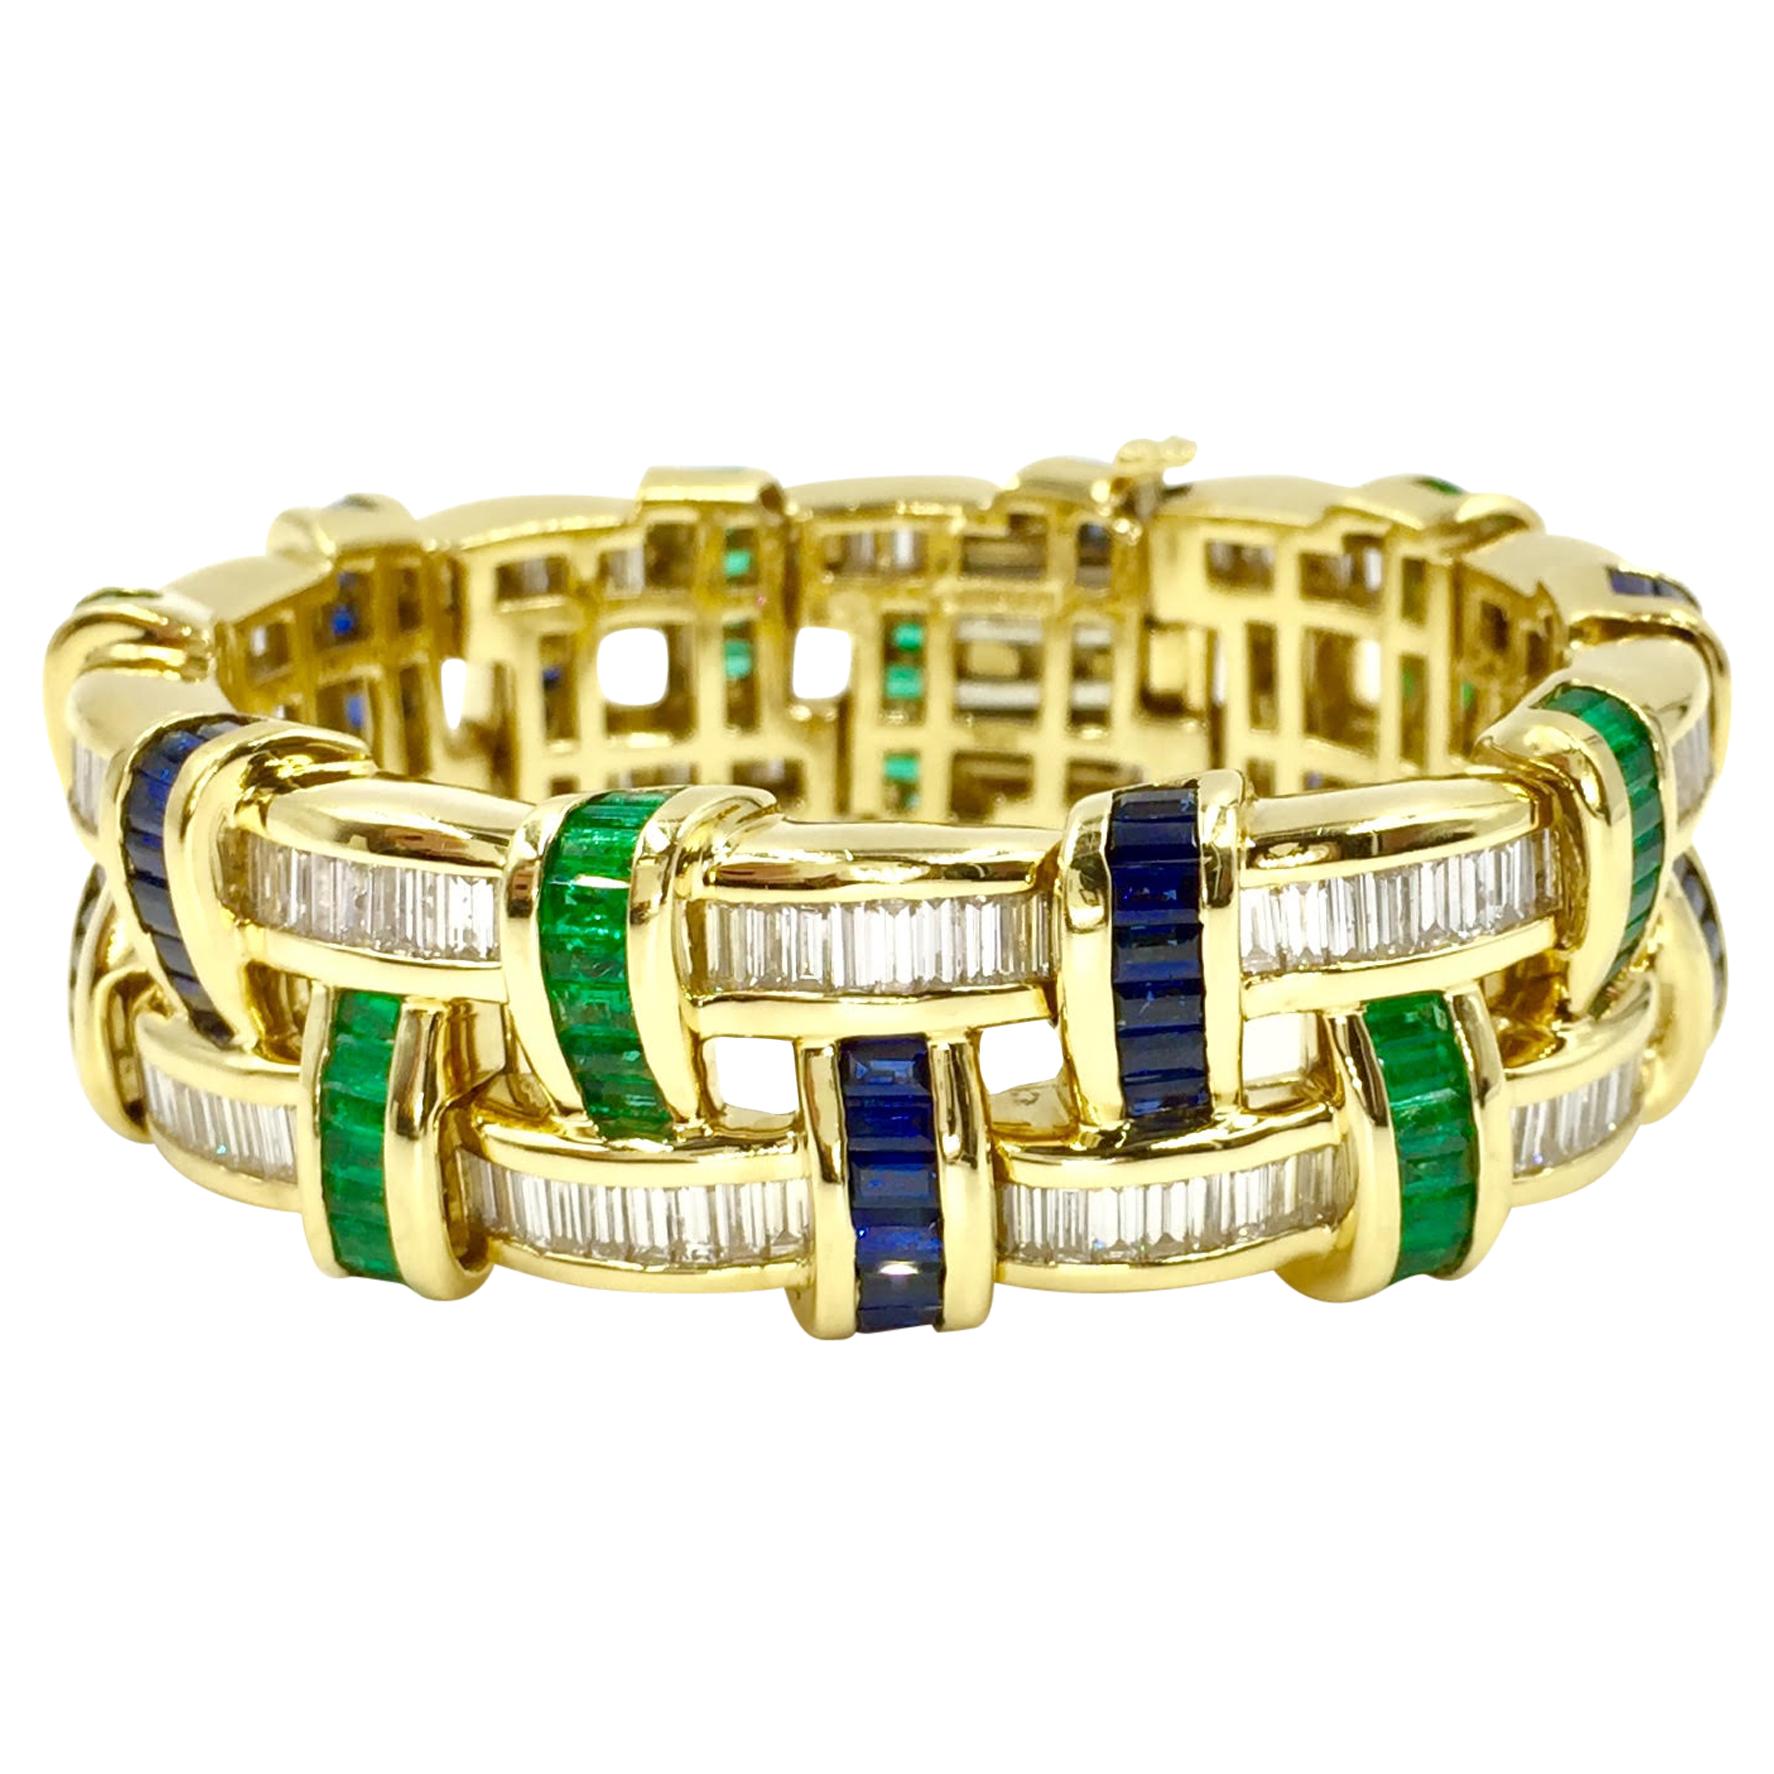 Diamond, Sapphire and Emerald Wide 18 Karat Bracelet by Charles Krypell For Sale